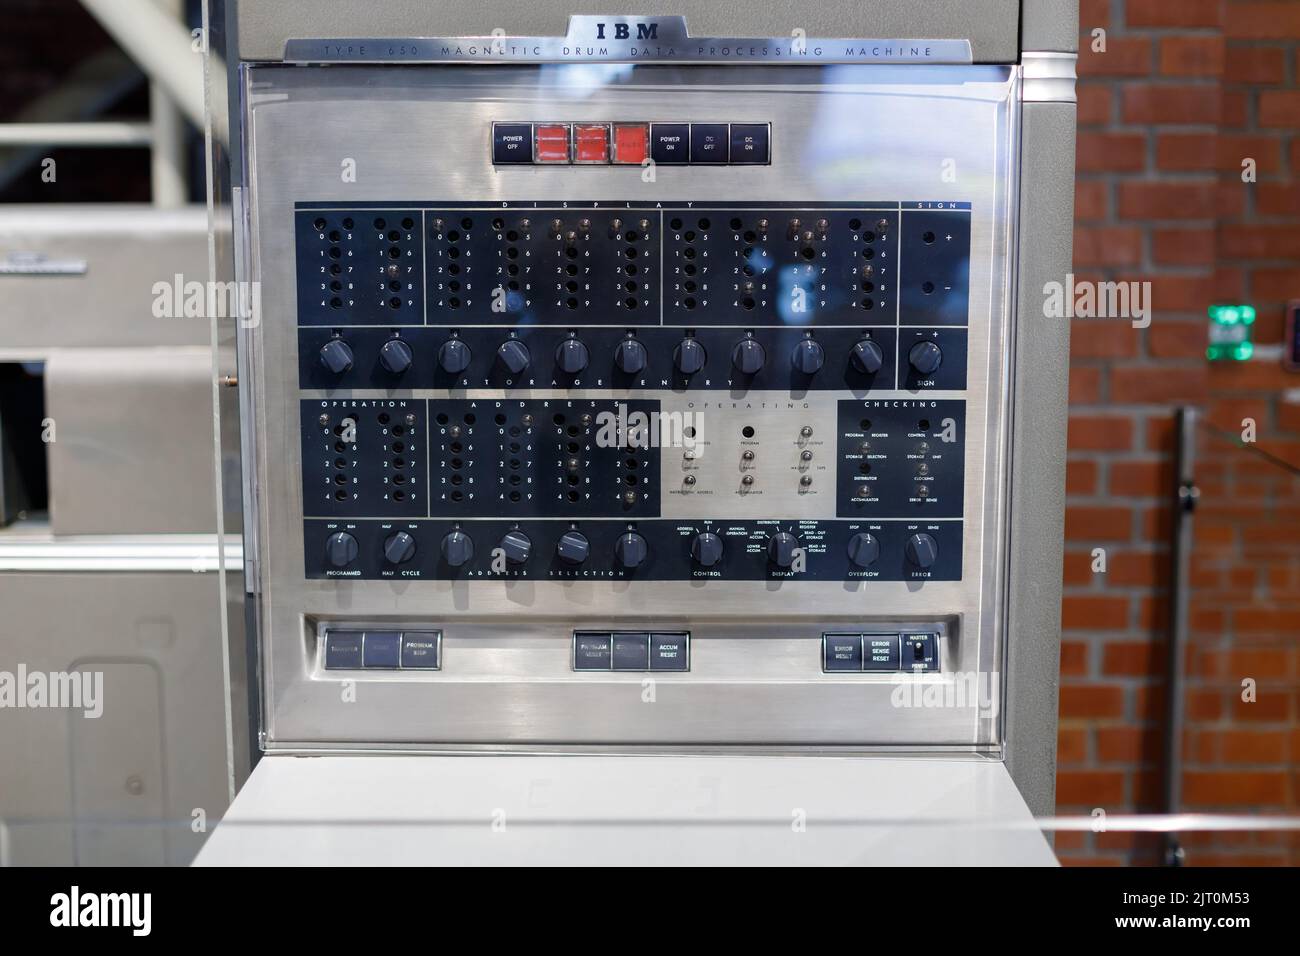 Oslo, Norway. May 01, 2022: Vintage computer at the Oslo Museum of Technology. IBM 650 - the first commercial computer. Stock Photo